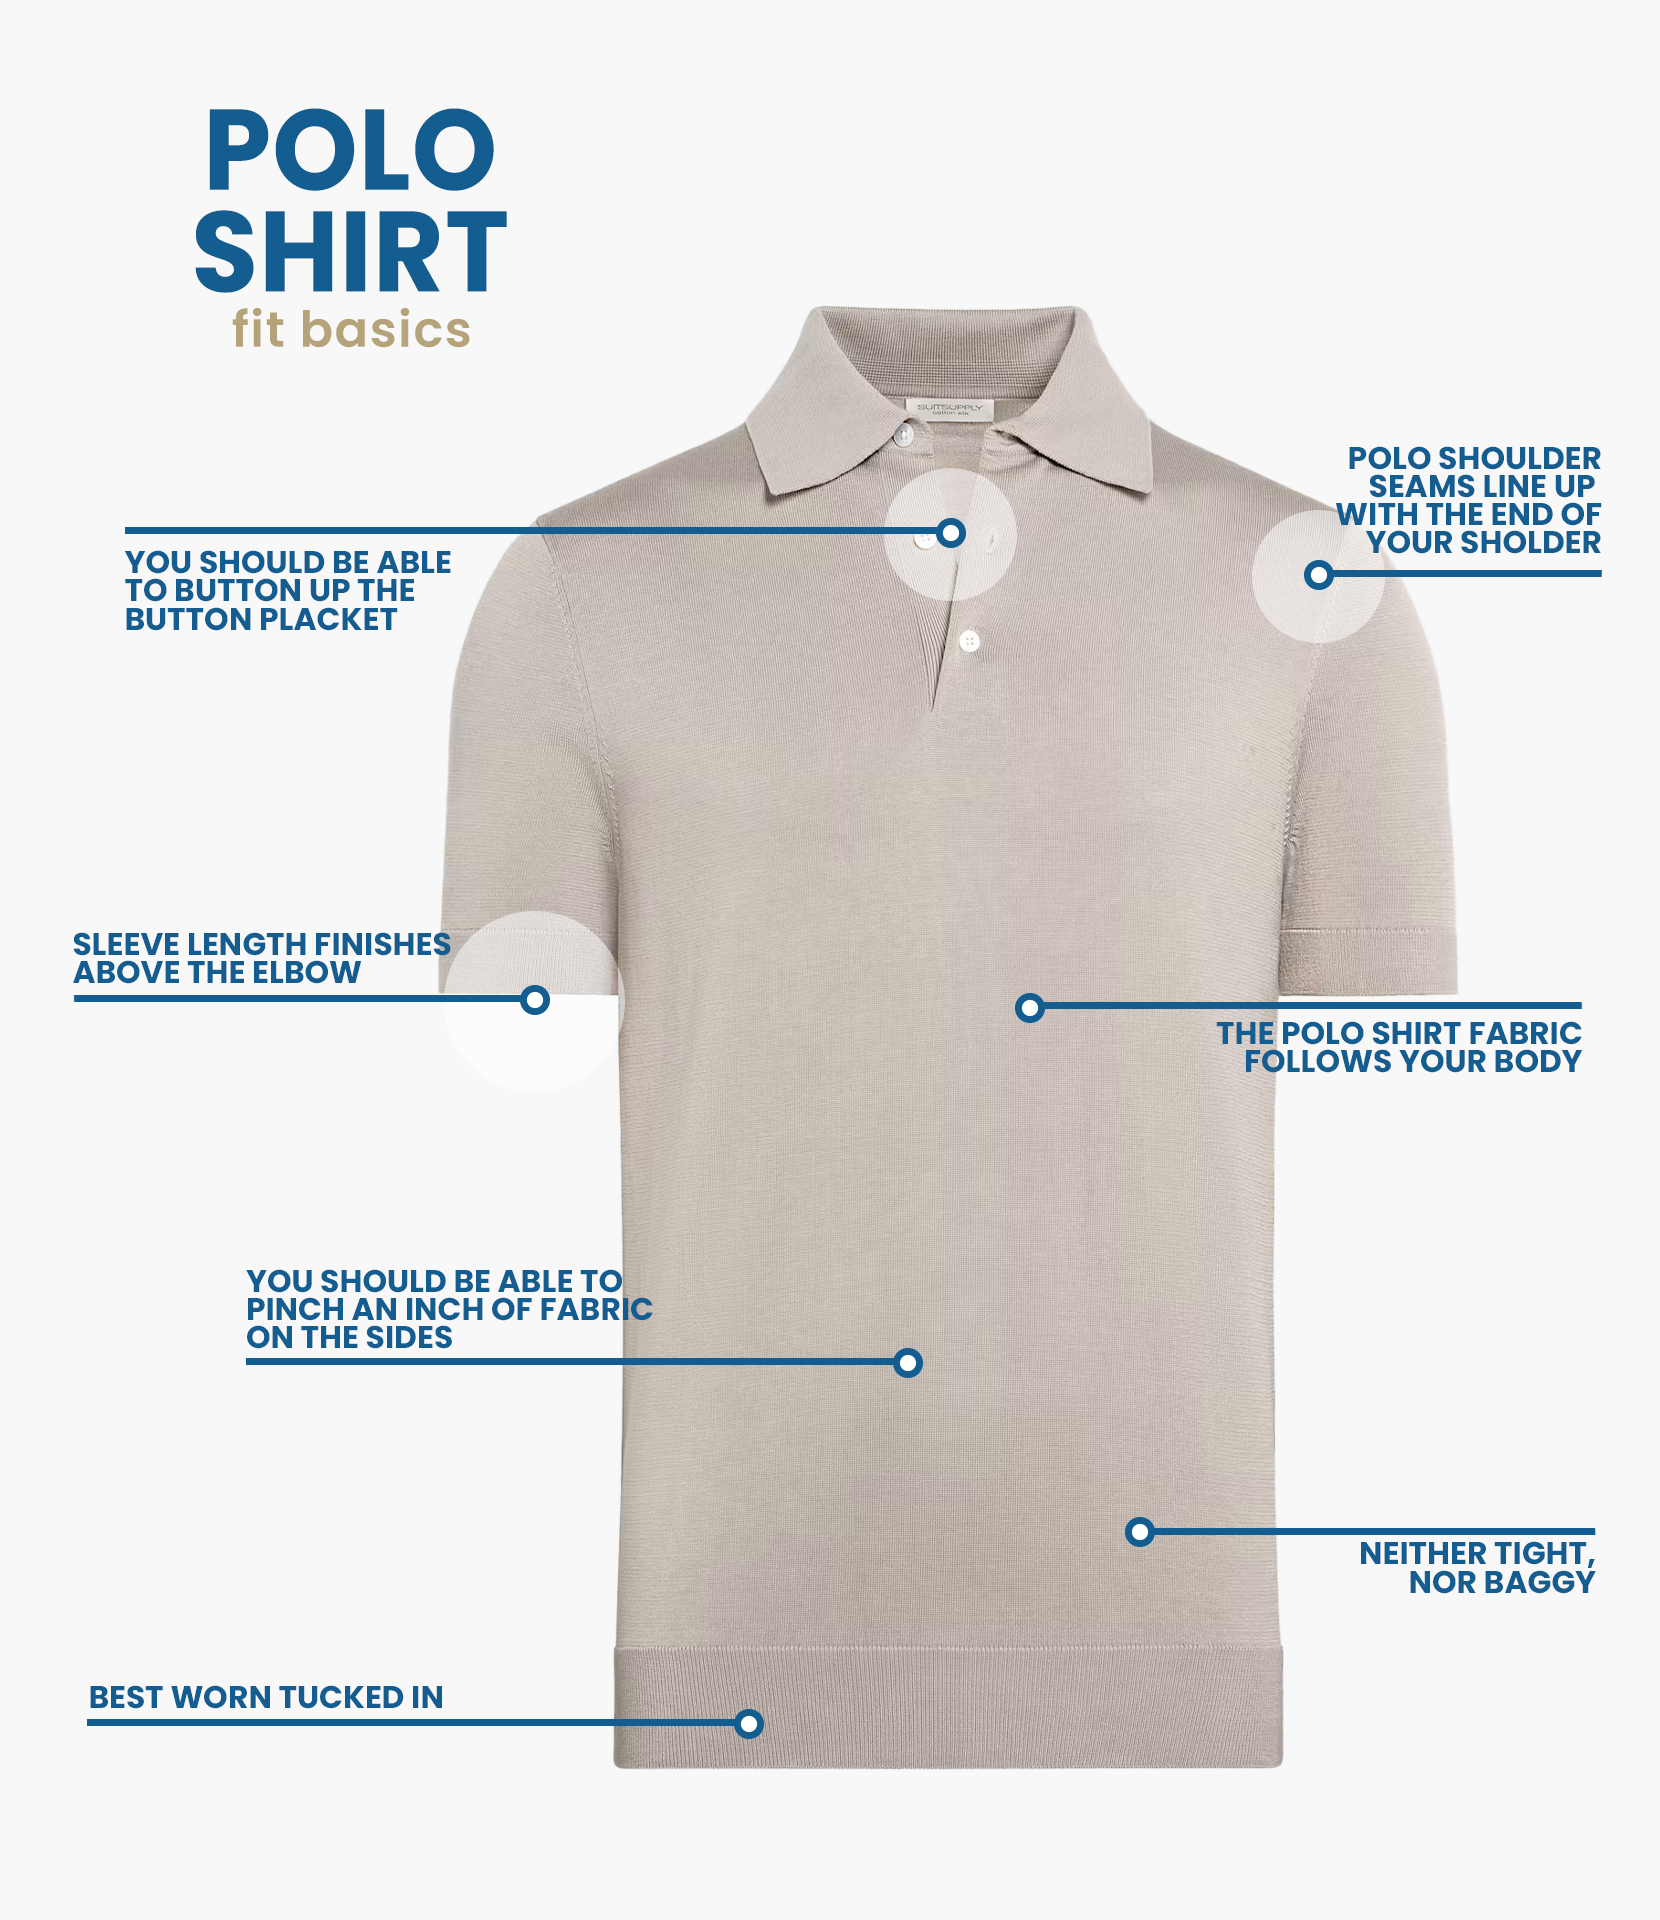 how should a polo shirt fit